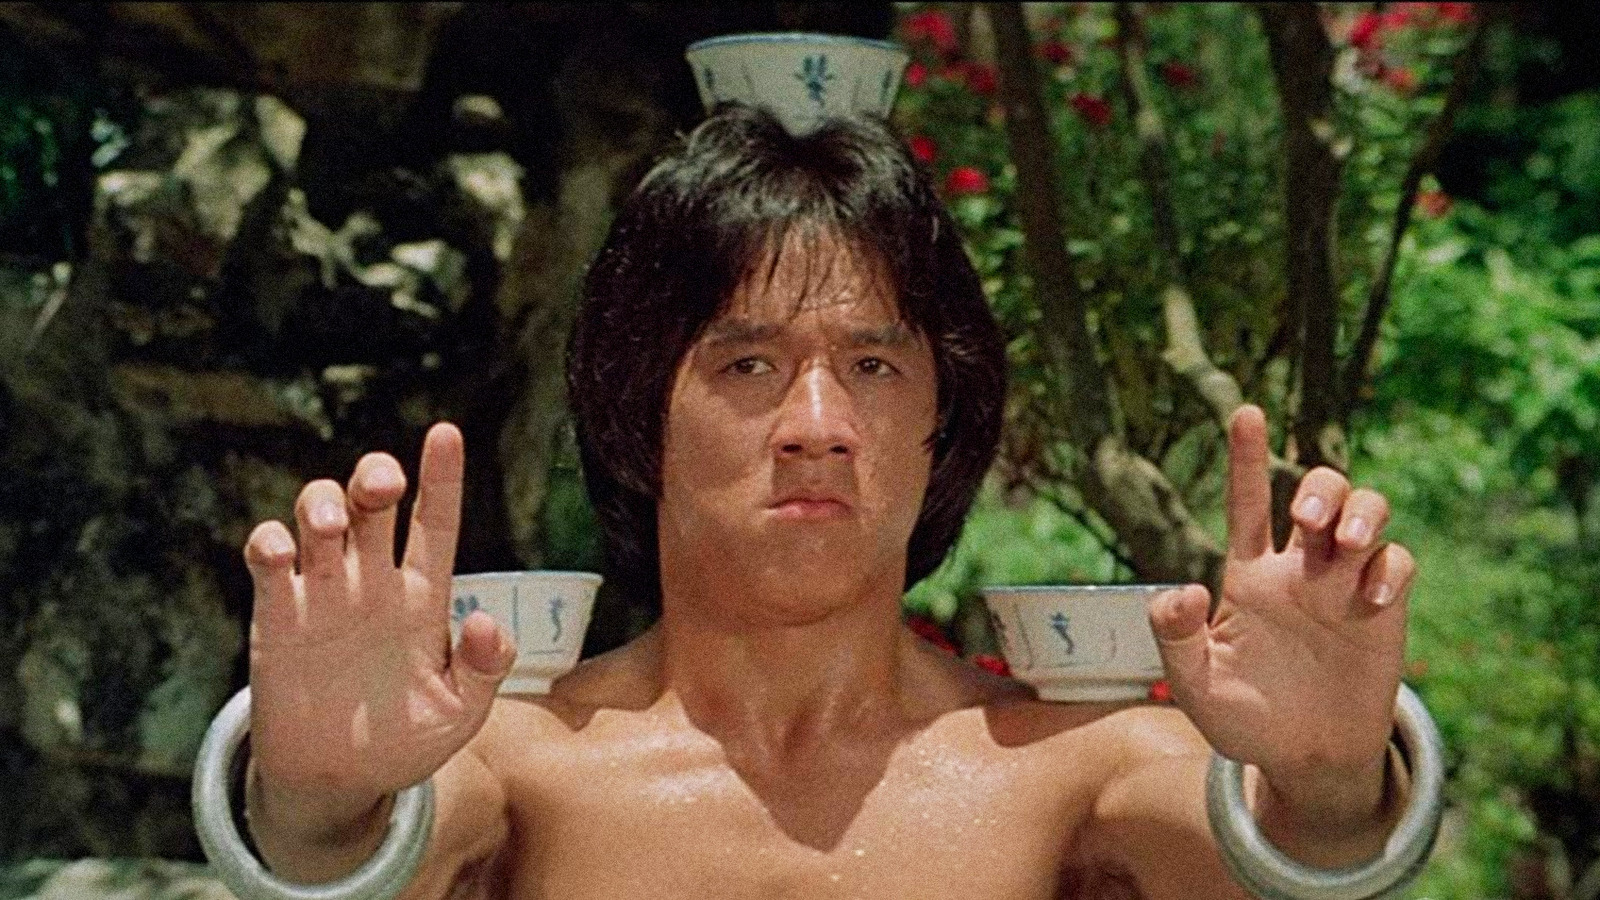 Top 5: Drunken Master (1978) - Asian film from China's Hong Kong directed by Woo-Ping Yuen - Action